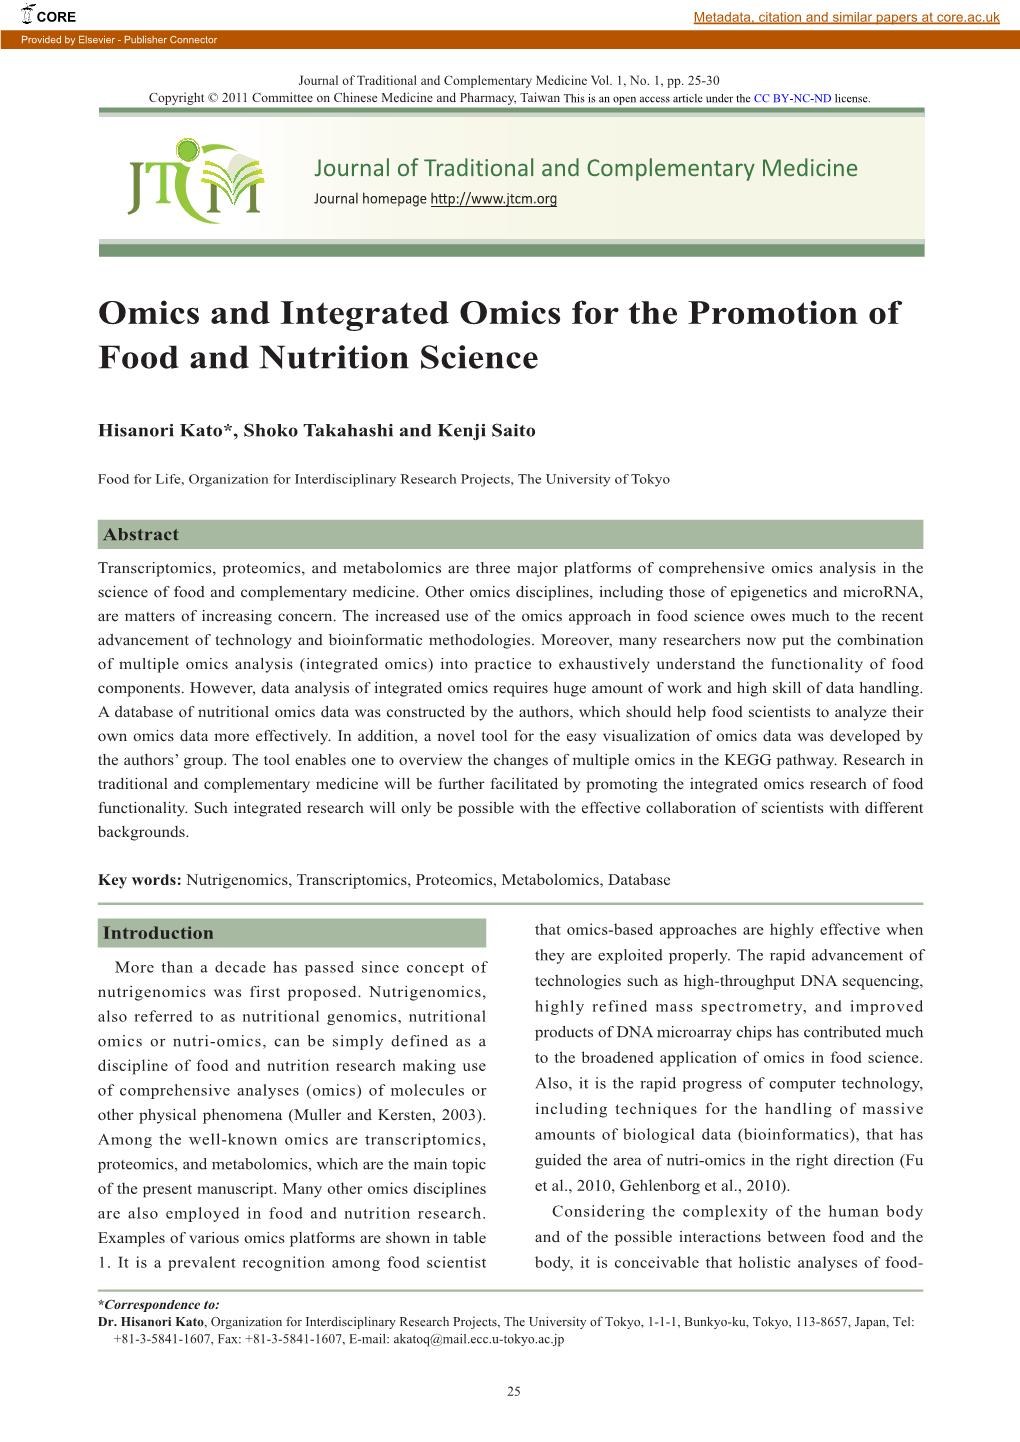 Omics and Integrated Omics for the Promotion of Food and Nutrition Science